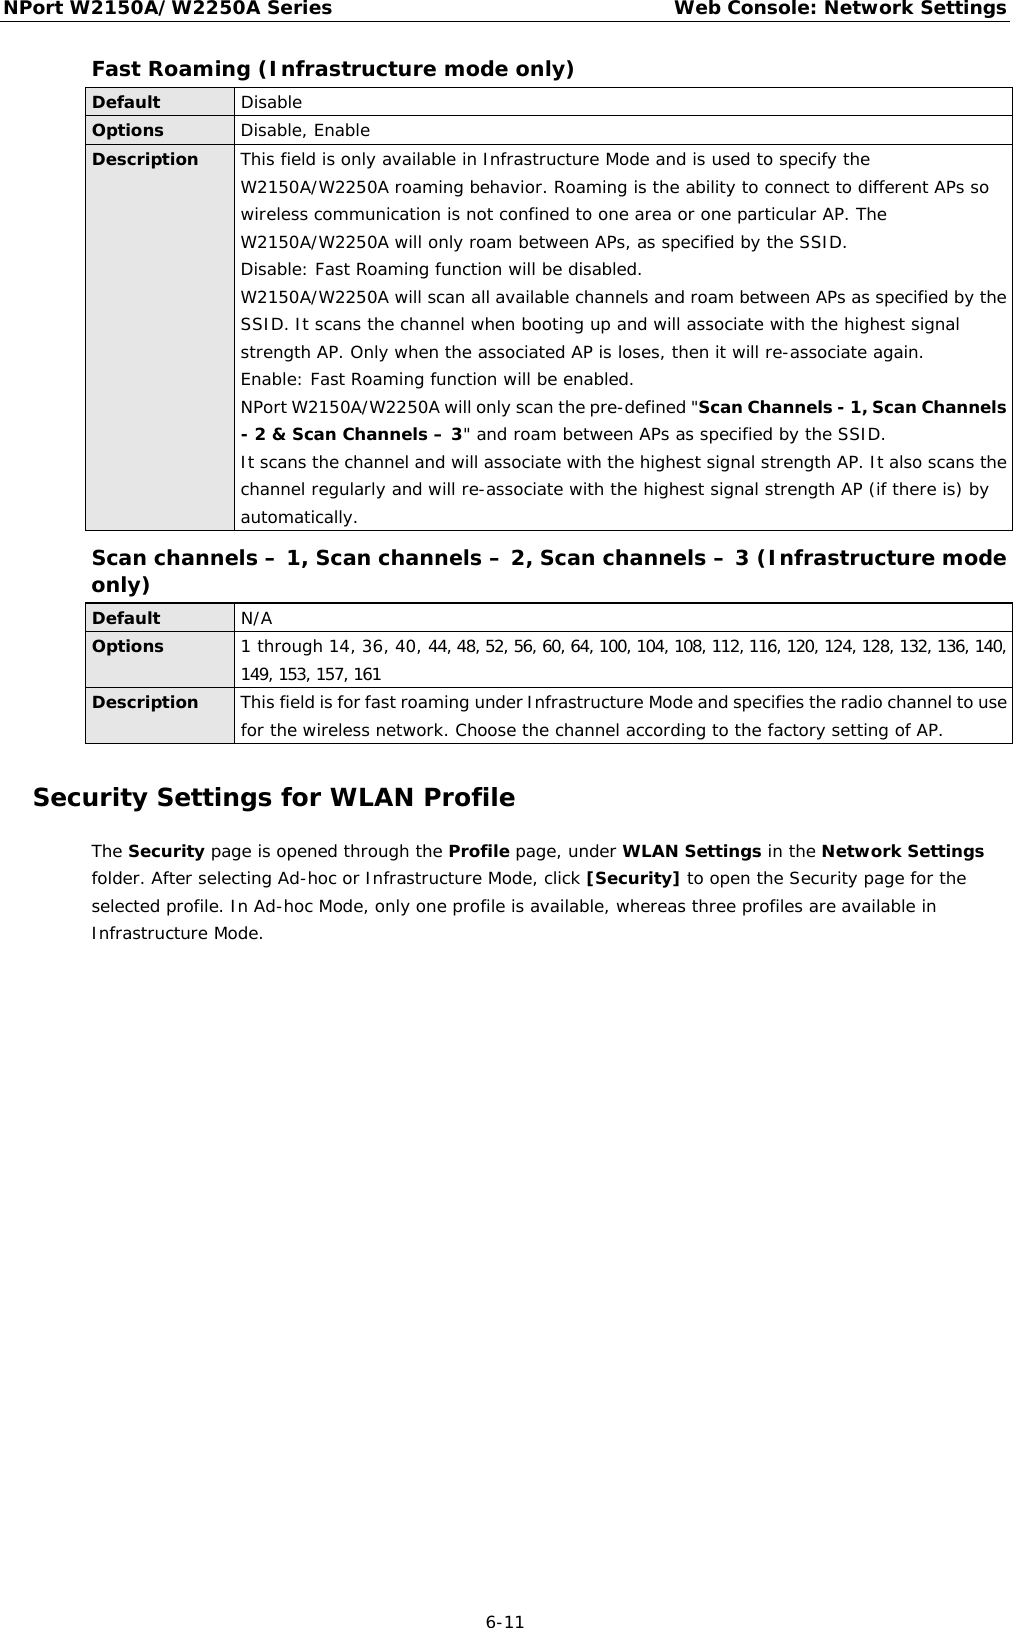 NPort W2150A/W2250A Series Web Console: Network Settings  6-11 Fast Roaming (Infrastructure mode only) Default Disable Options Disable, Enable Description This field is only available in Infrastructure Mode and is used to specify the  W2150A/W2250A roaming behavior. Roaming is the ability to connect to different APs so wireless communication is not confined to one area or one particular AP. The W2150A/W2250A will only roam between APs, as specified by the SSID. Disable: Fast Roaming function will be disabled. W2150A/W2250A will scan all available channels and roam between APs as specified by the SSID. It scans the channel when booting up and will associate with the highest signal strength AP. Only when the associated AP is loses, then it will re-associate again. Enable: Fast Roaming function will be enabled. NPort W2150A/W2250A will only scan the pre-defined &quot;Scan Channels - 1, Scan Channels - 2 &amp; Scan Channels – 3&quot; and roam between APs as specified by the SSID. It scans the channel and will associate with the highest signal strength AP. It also scans the channel regularly and will re-associate with the highest signal strength AP (if there is) by automatically. Scan channels – 1, Scan channels – 2, Scan channels – 3 (Infrastructure mode only) Default N/A Options 1 through 14, 36, 40, 44, 48, 52, 56, 60, 64, 100, 104, 108, 112, 116, 120, 124, 128, 132, 136, 140, 149, 153, 157, 161 Description This field is for fast roaming under Infrastructure Mode and specifies the radio channel to use for the wireless network. Choose the channel according to the factory setting of AP. Security Settings for WLAN Profile The Security page is opened through the Profile page, under WLAN Settings in the Network Settings folder. After selecting Ad-hoc or Infrastructure Mode, click [Security] to open the Security page for the selected profile. In Ad-hoc Mode, only one profile is available, whereas three profiles are available in Infrastructure Mode. 